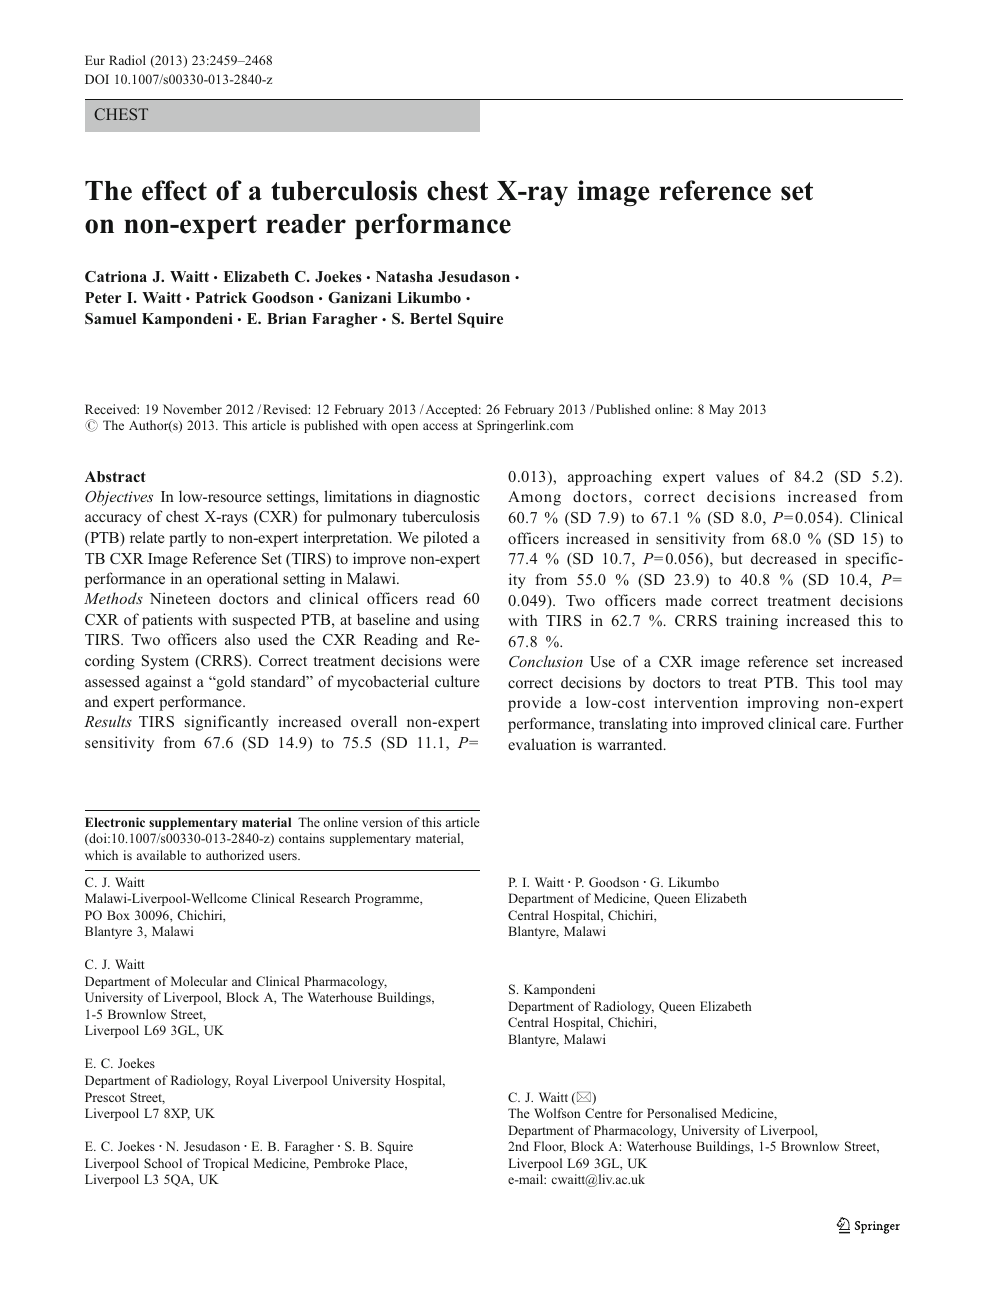 The Effect Of A Tuberculosis Chest X Ray Image Reference Set On Non Expert Reader Performance Topic Of Research Paper In Clinical Medicine Download Scholarly Article Pdf And Read For Free On Cyberleninka